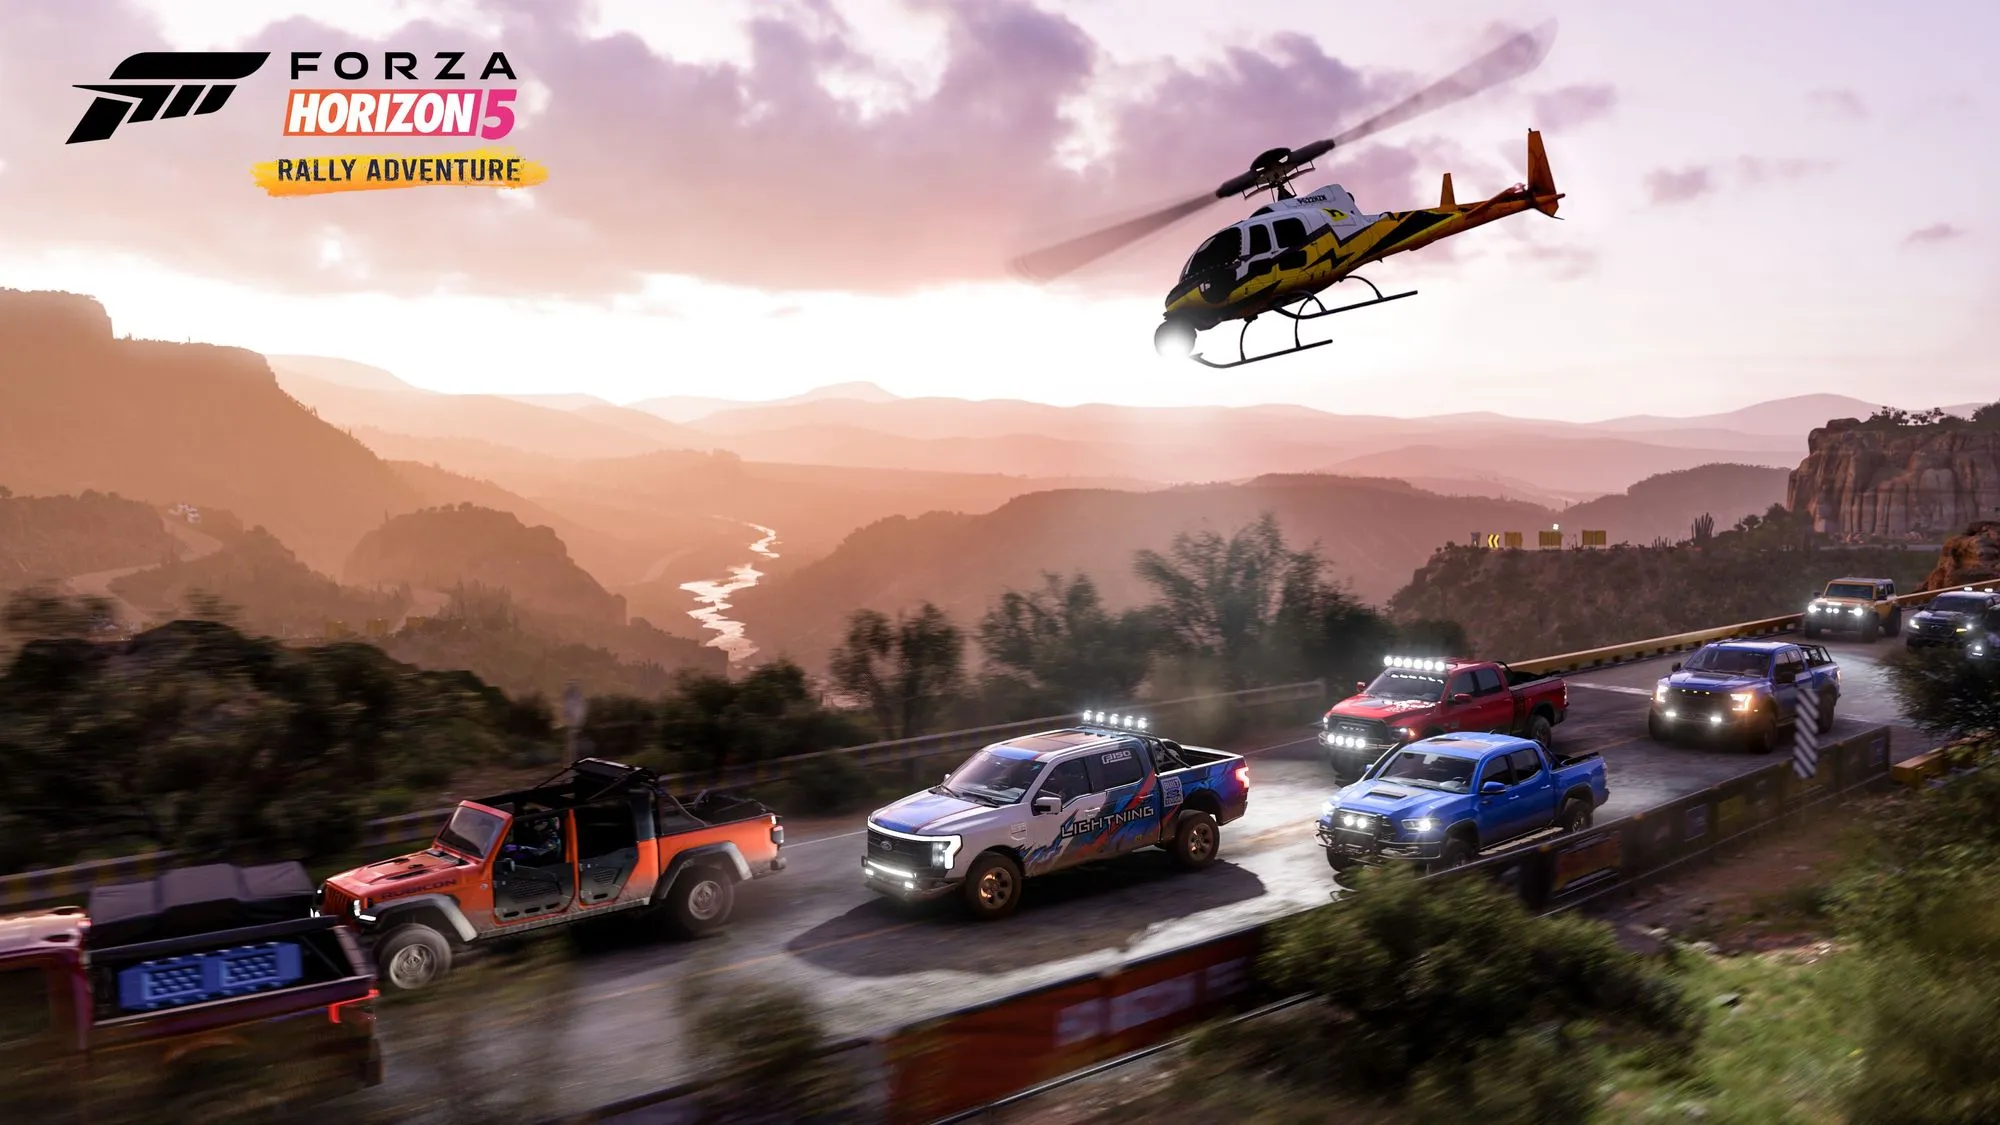 Cars and a helicopter in Forza Horizon 5's Rally Adventure expansion.